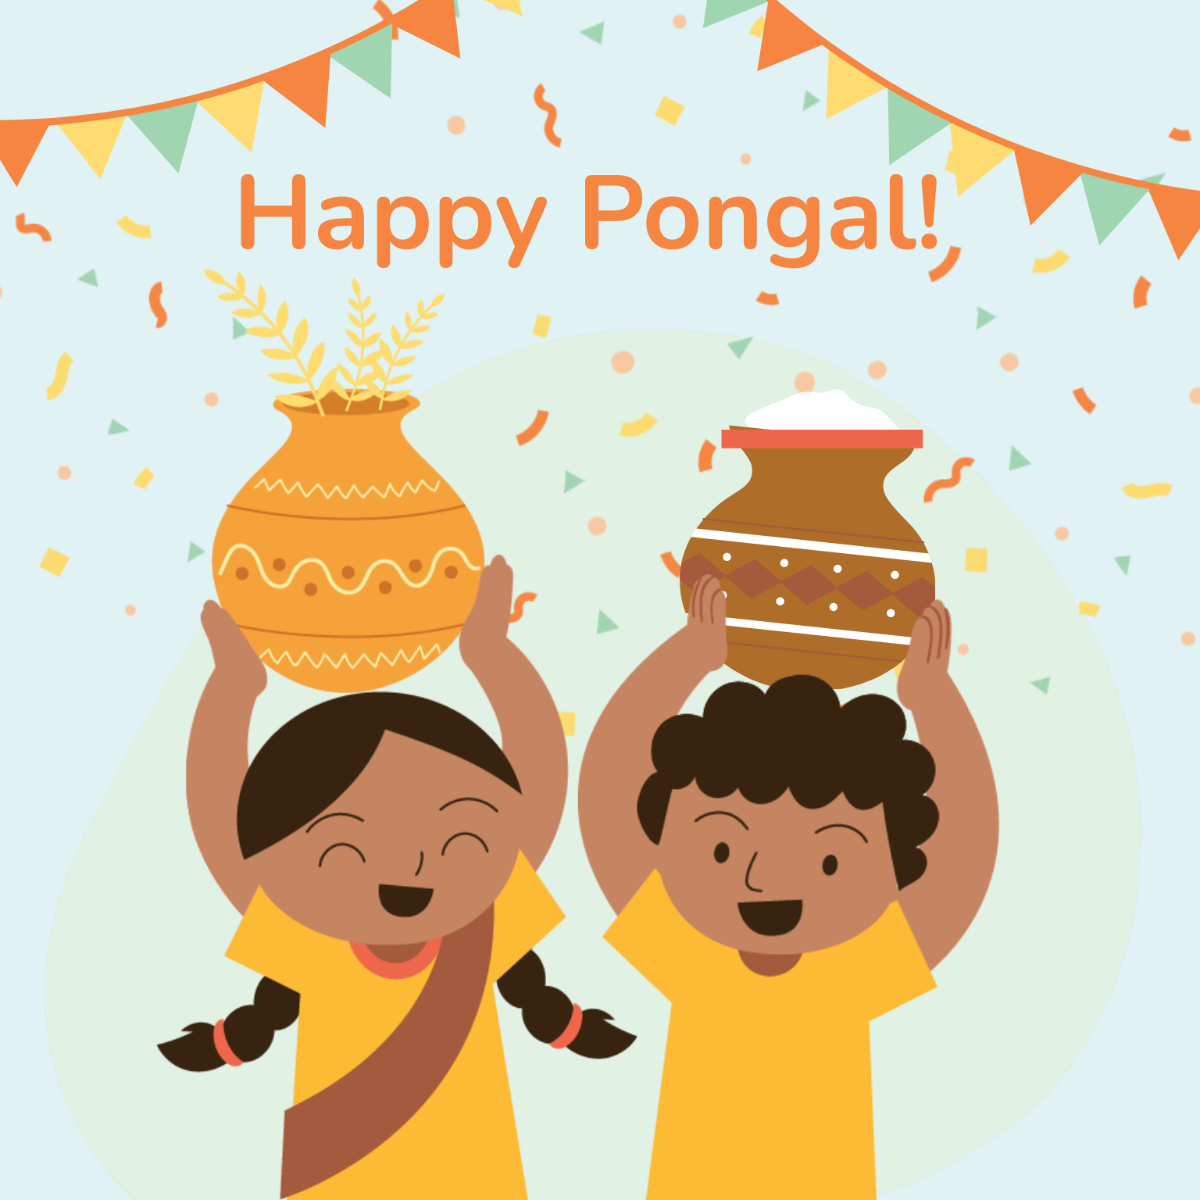 Free Happy Pongal Illustration Template